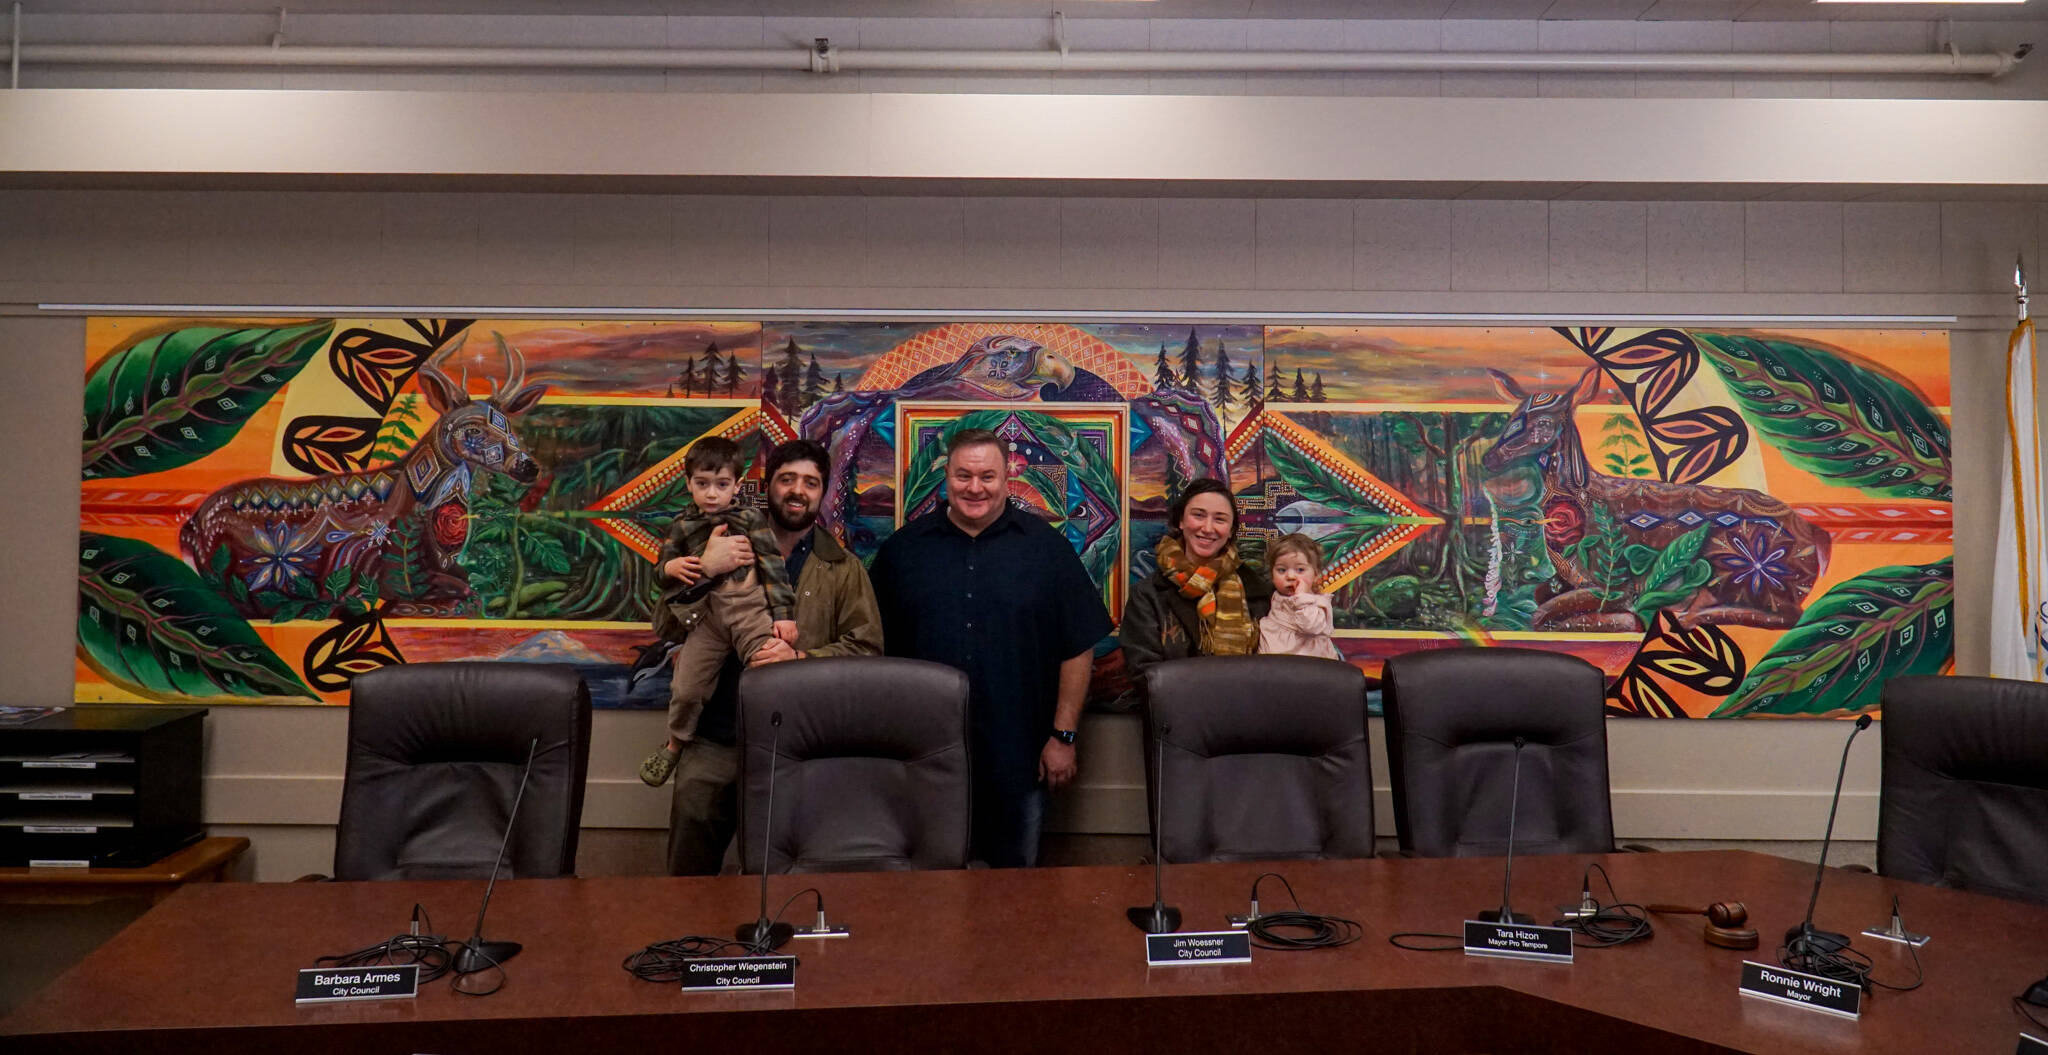 From left to right: George Mann, artist Nick Mann, Mayor Ronnie Wright, artist Kendall Mann and Anastasia Mann pose before the newly-installed “Song of the Salish Sea” in council chambers. (Photo by Sam Fletcher)